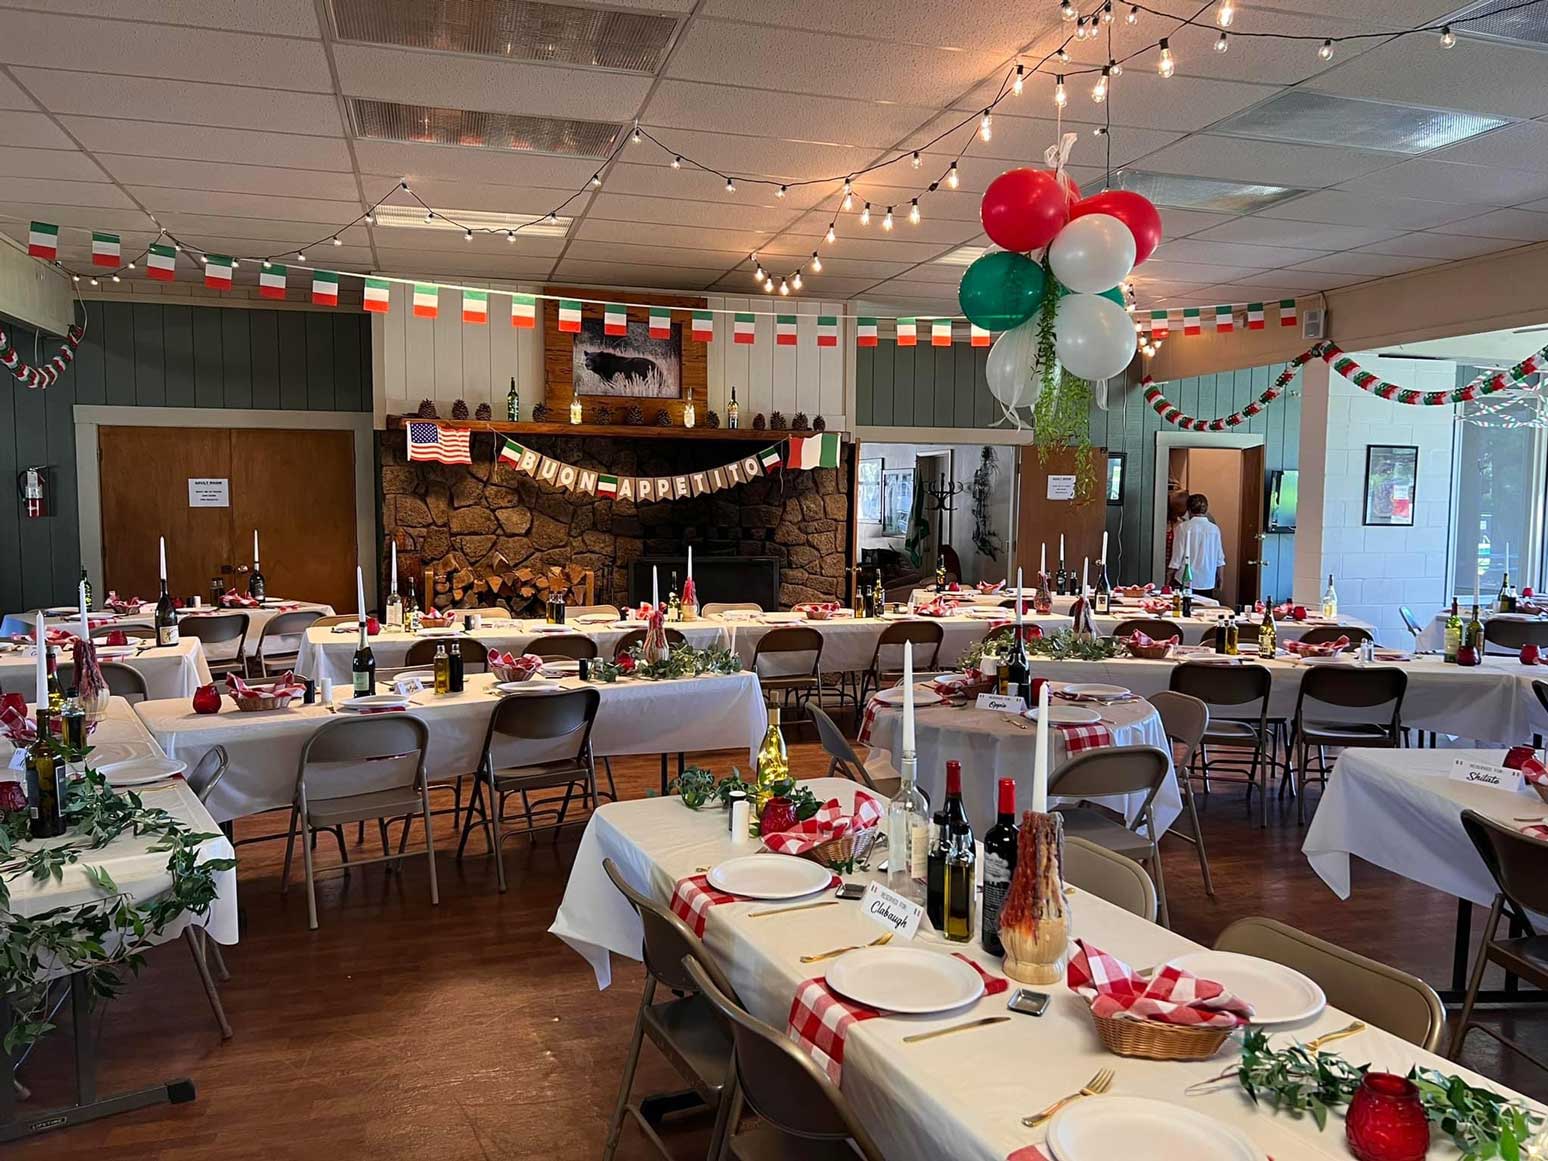 Harris Hall Lodge decorated for pasta night